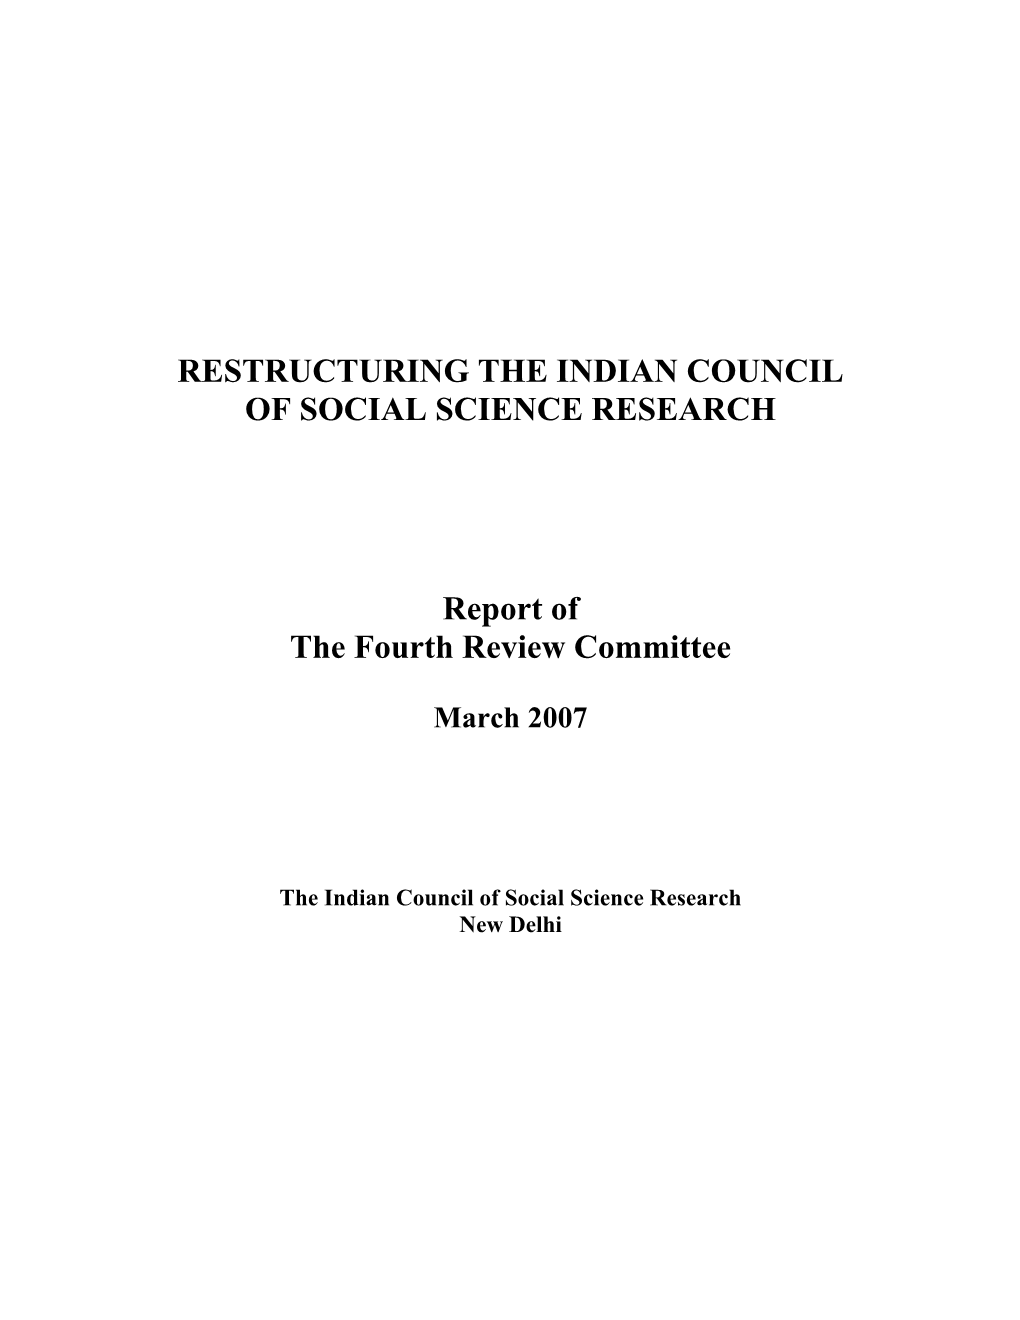 Restructuring the Indian Council of Social Science Research